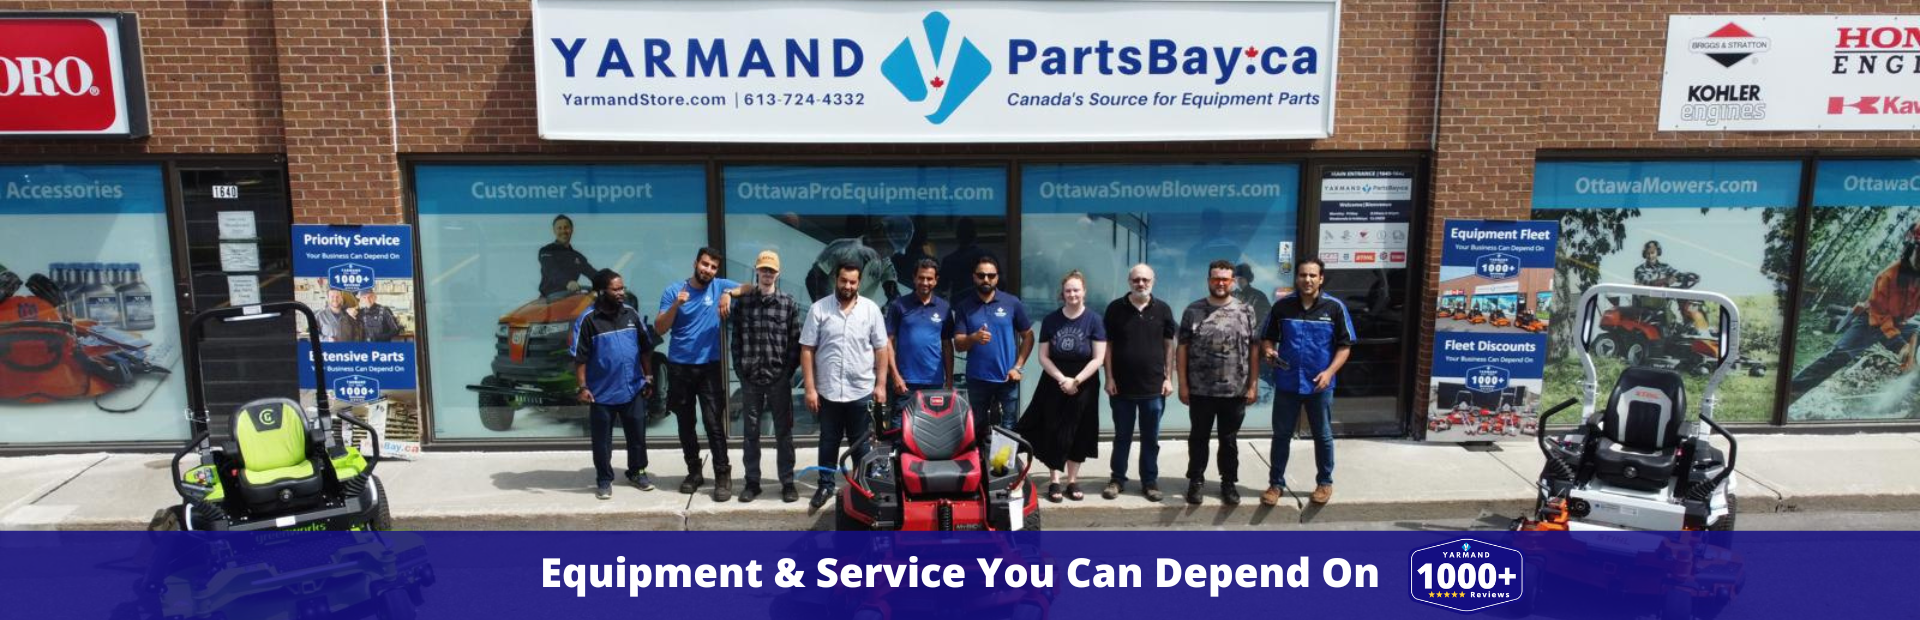 YARMAND Equipment And Service Your Can Depend On 